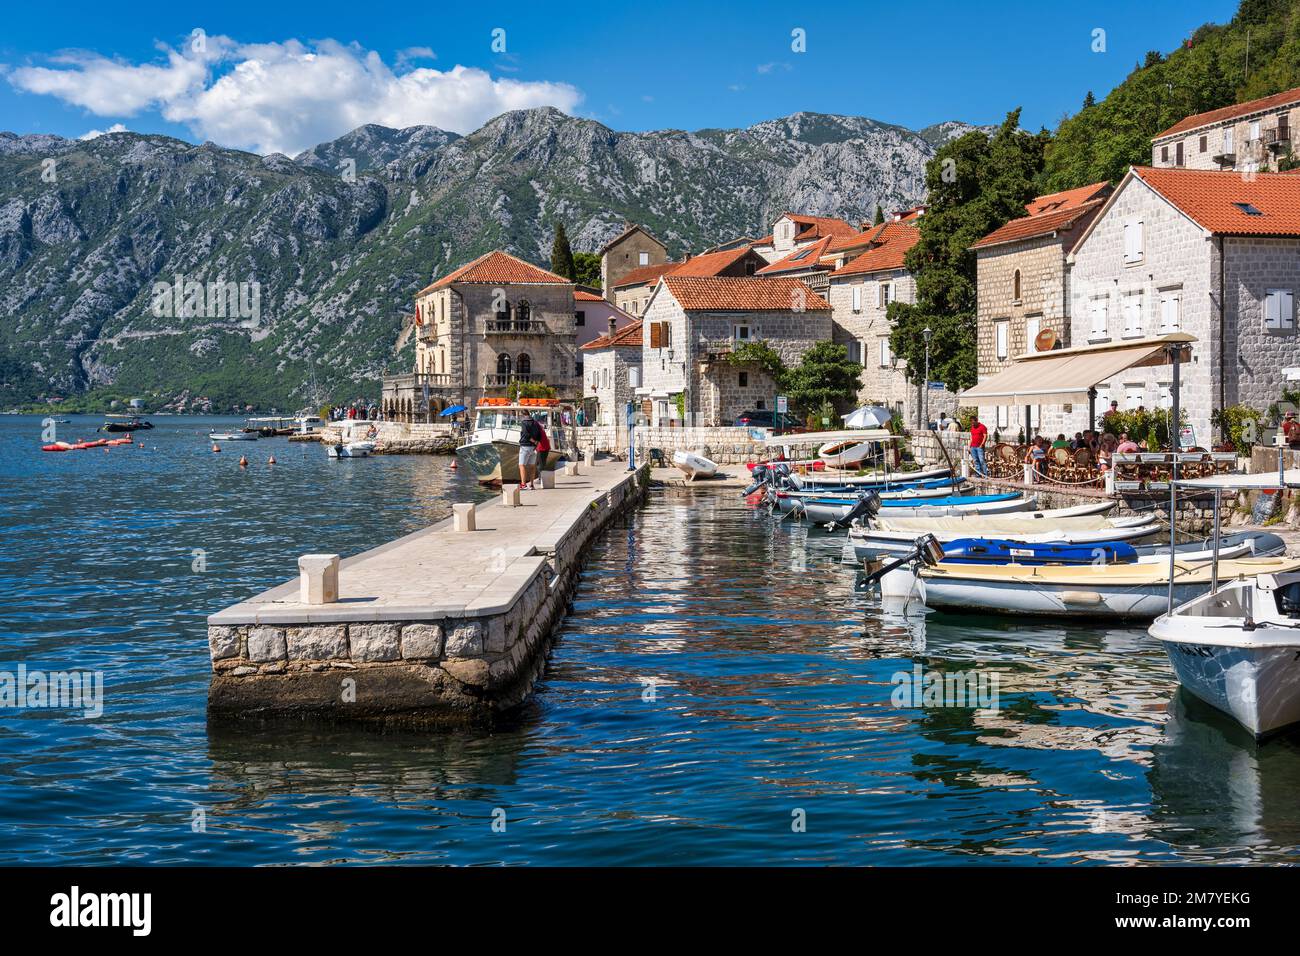 Boats tied up in one of the many small harbours on the waterfront of Perast on the Bay of Kotor in Montenegro Stock Photo